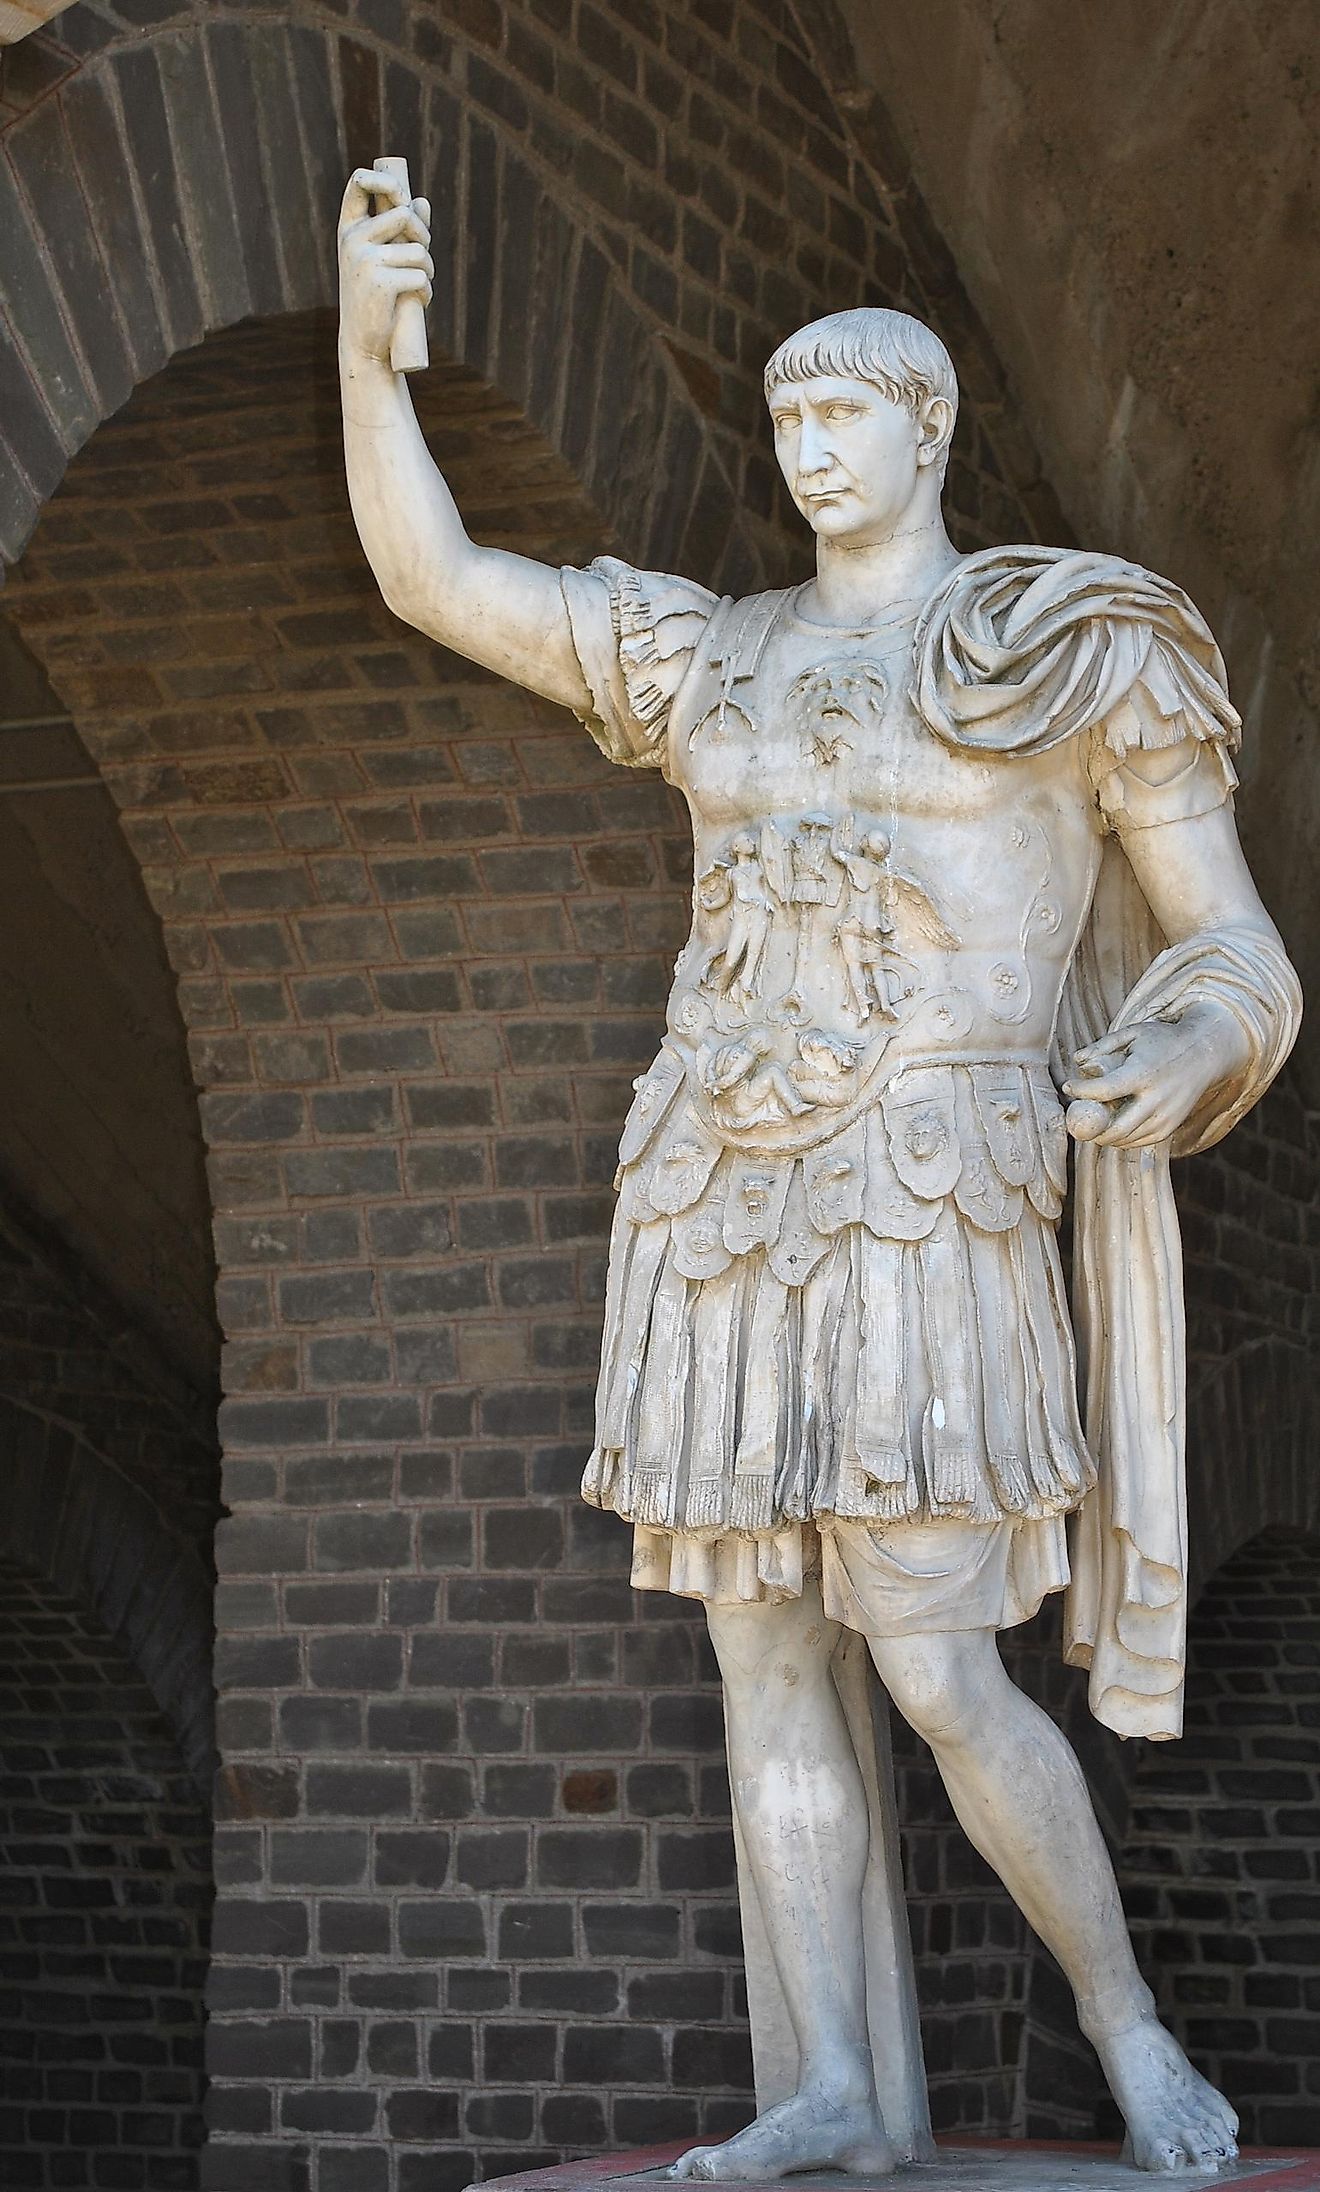 Statue of Trajan, posing in military garb, in front of the Amphitheater of Colonia Ulpia Traiana in the Xanten Archaeological Park. Image credit: Hartmann Linge/Wikimedia.org